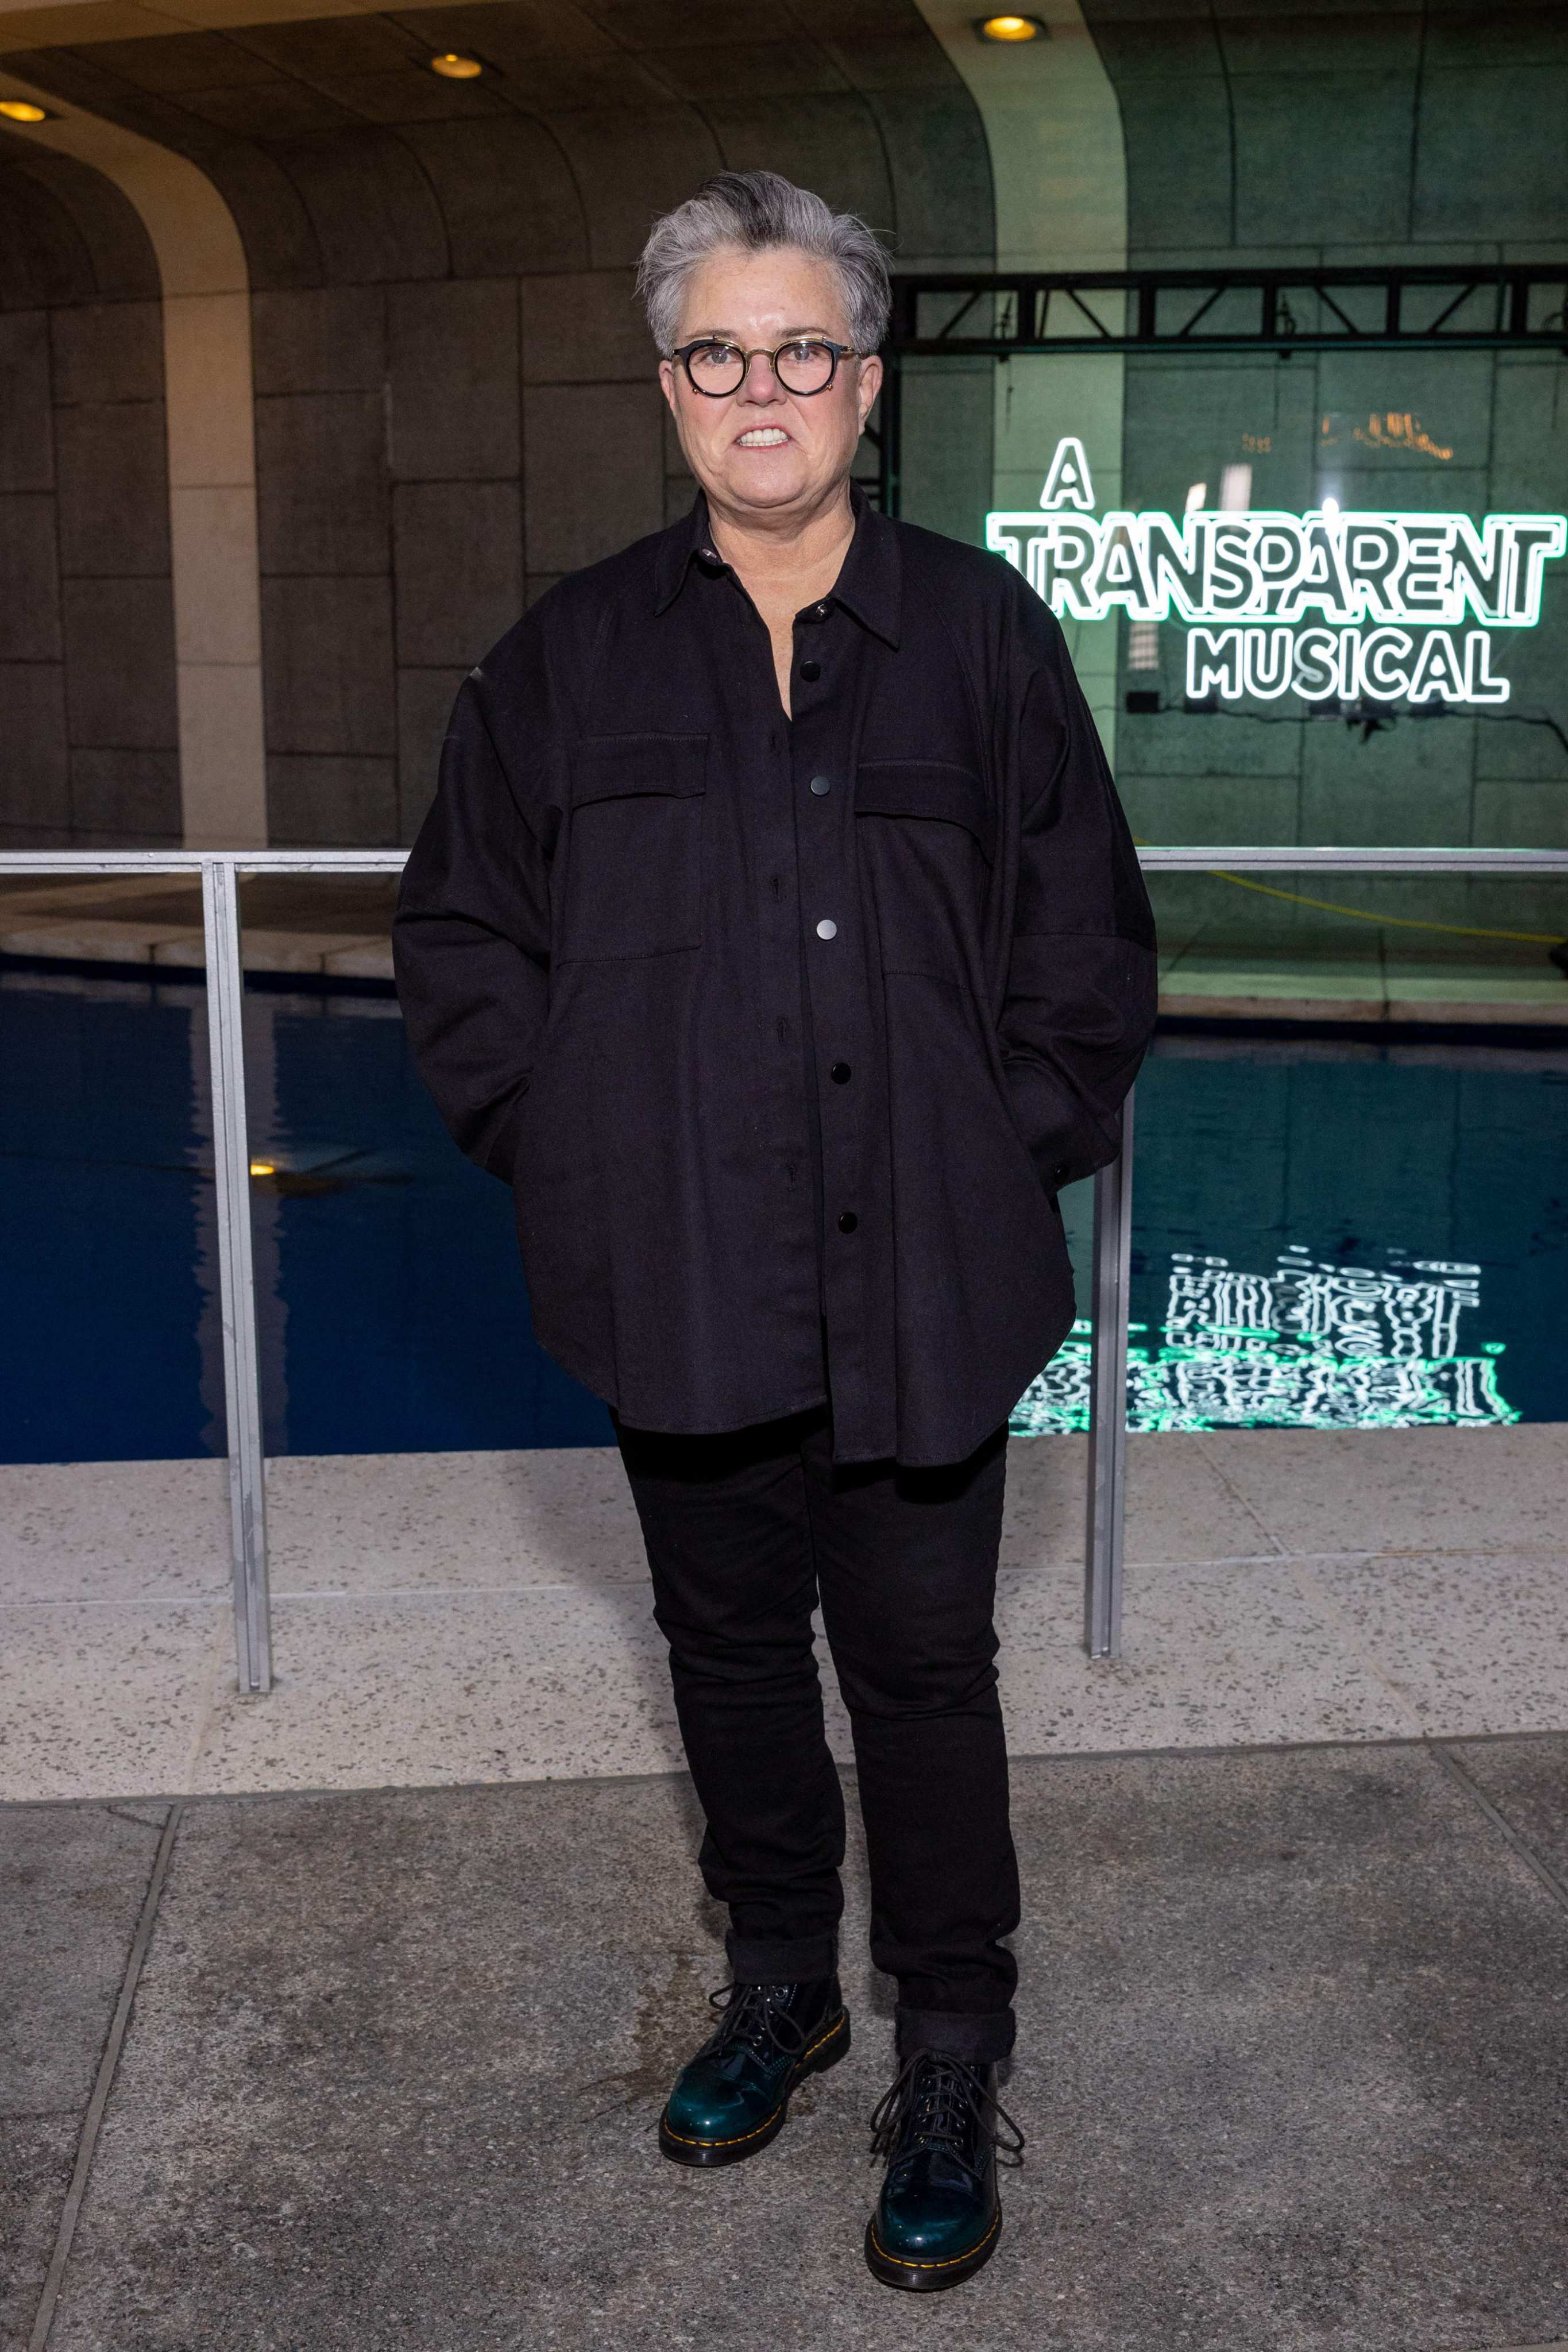 Rosie O’Donnell attends the opening night performance of A Transparent Musical in California, in May 2023. Photo: Getty Images